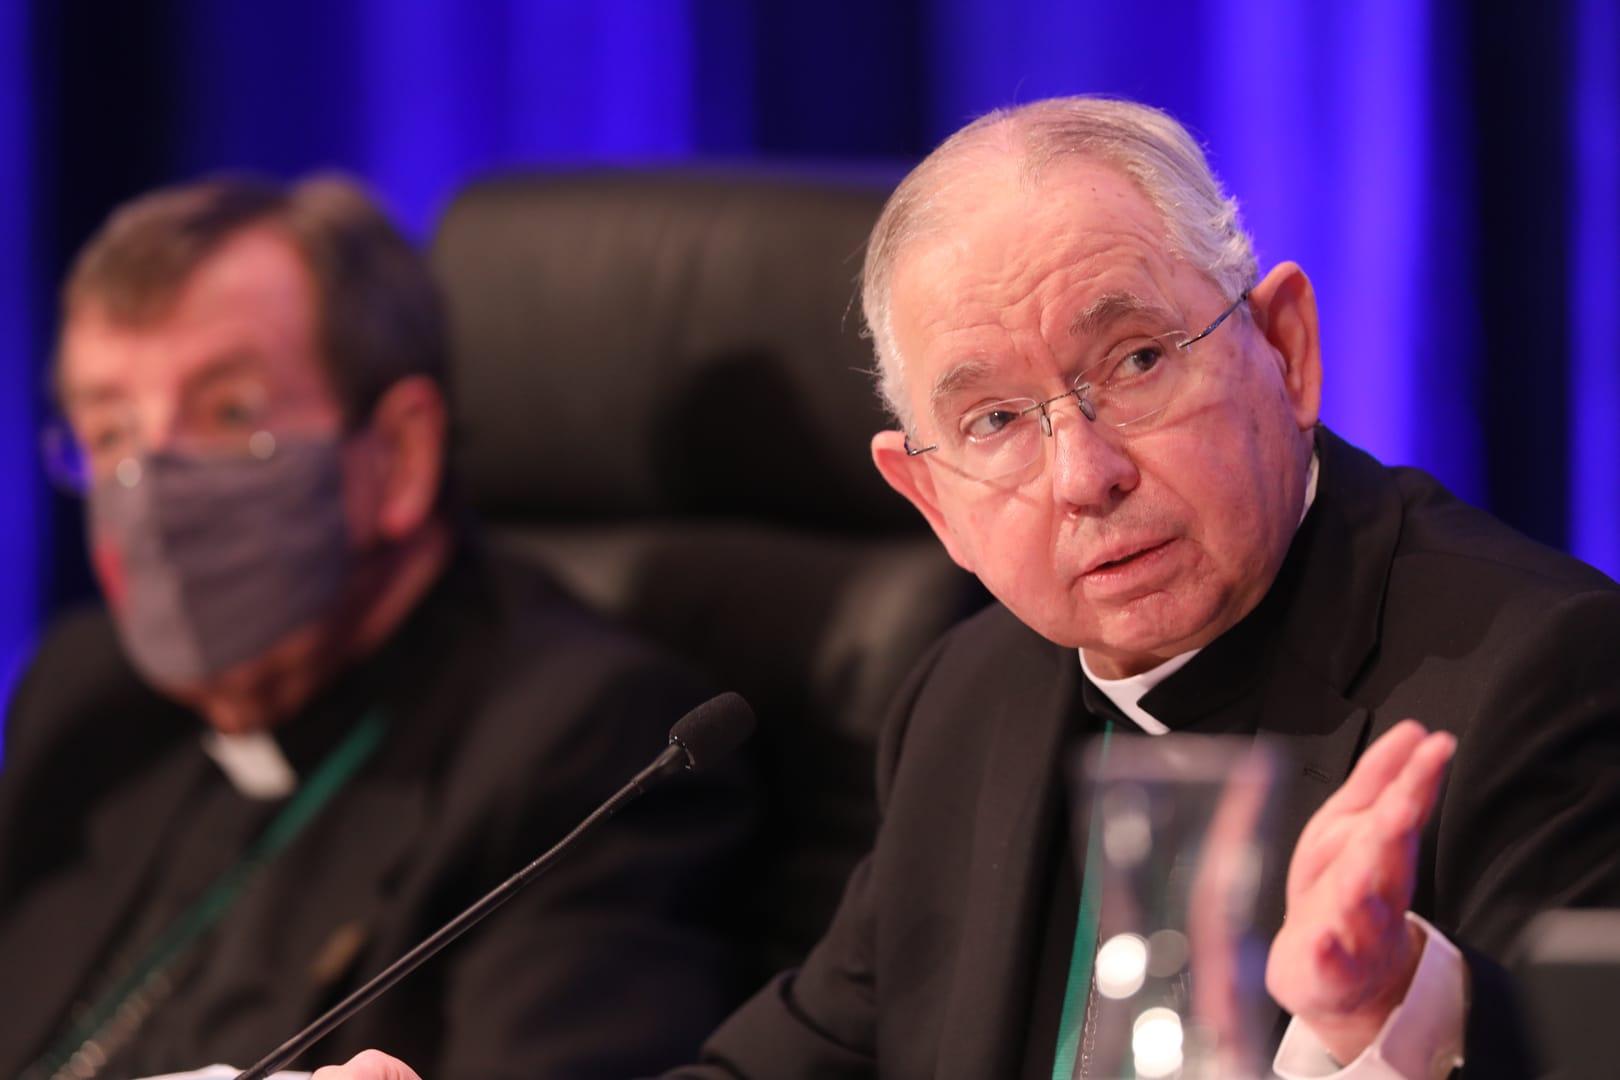 U.S. bishops overwhelmingly approve document on the Eucharist